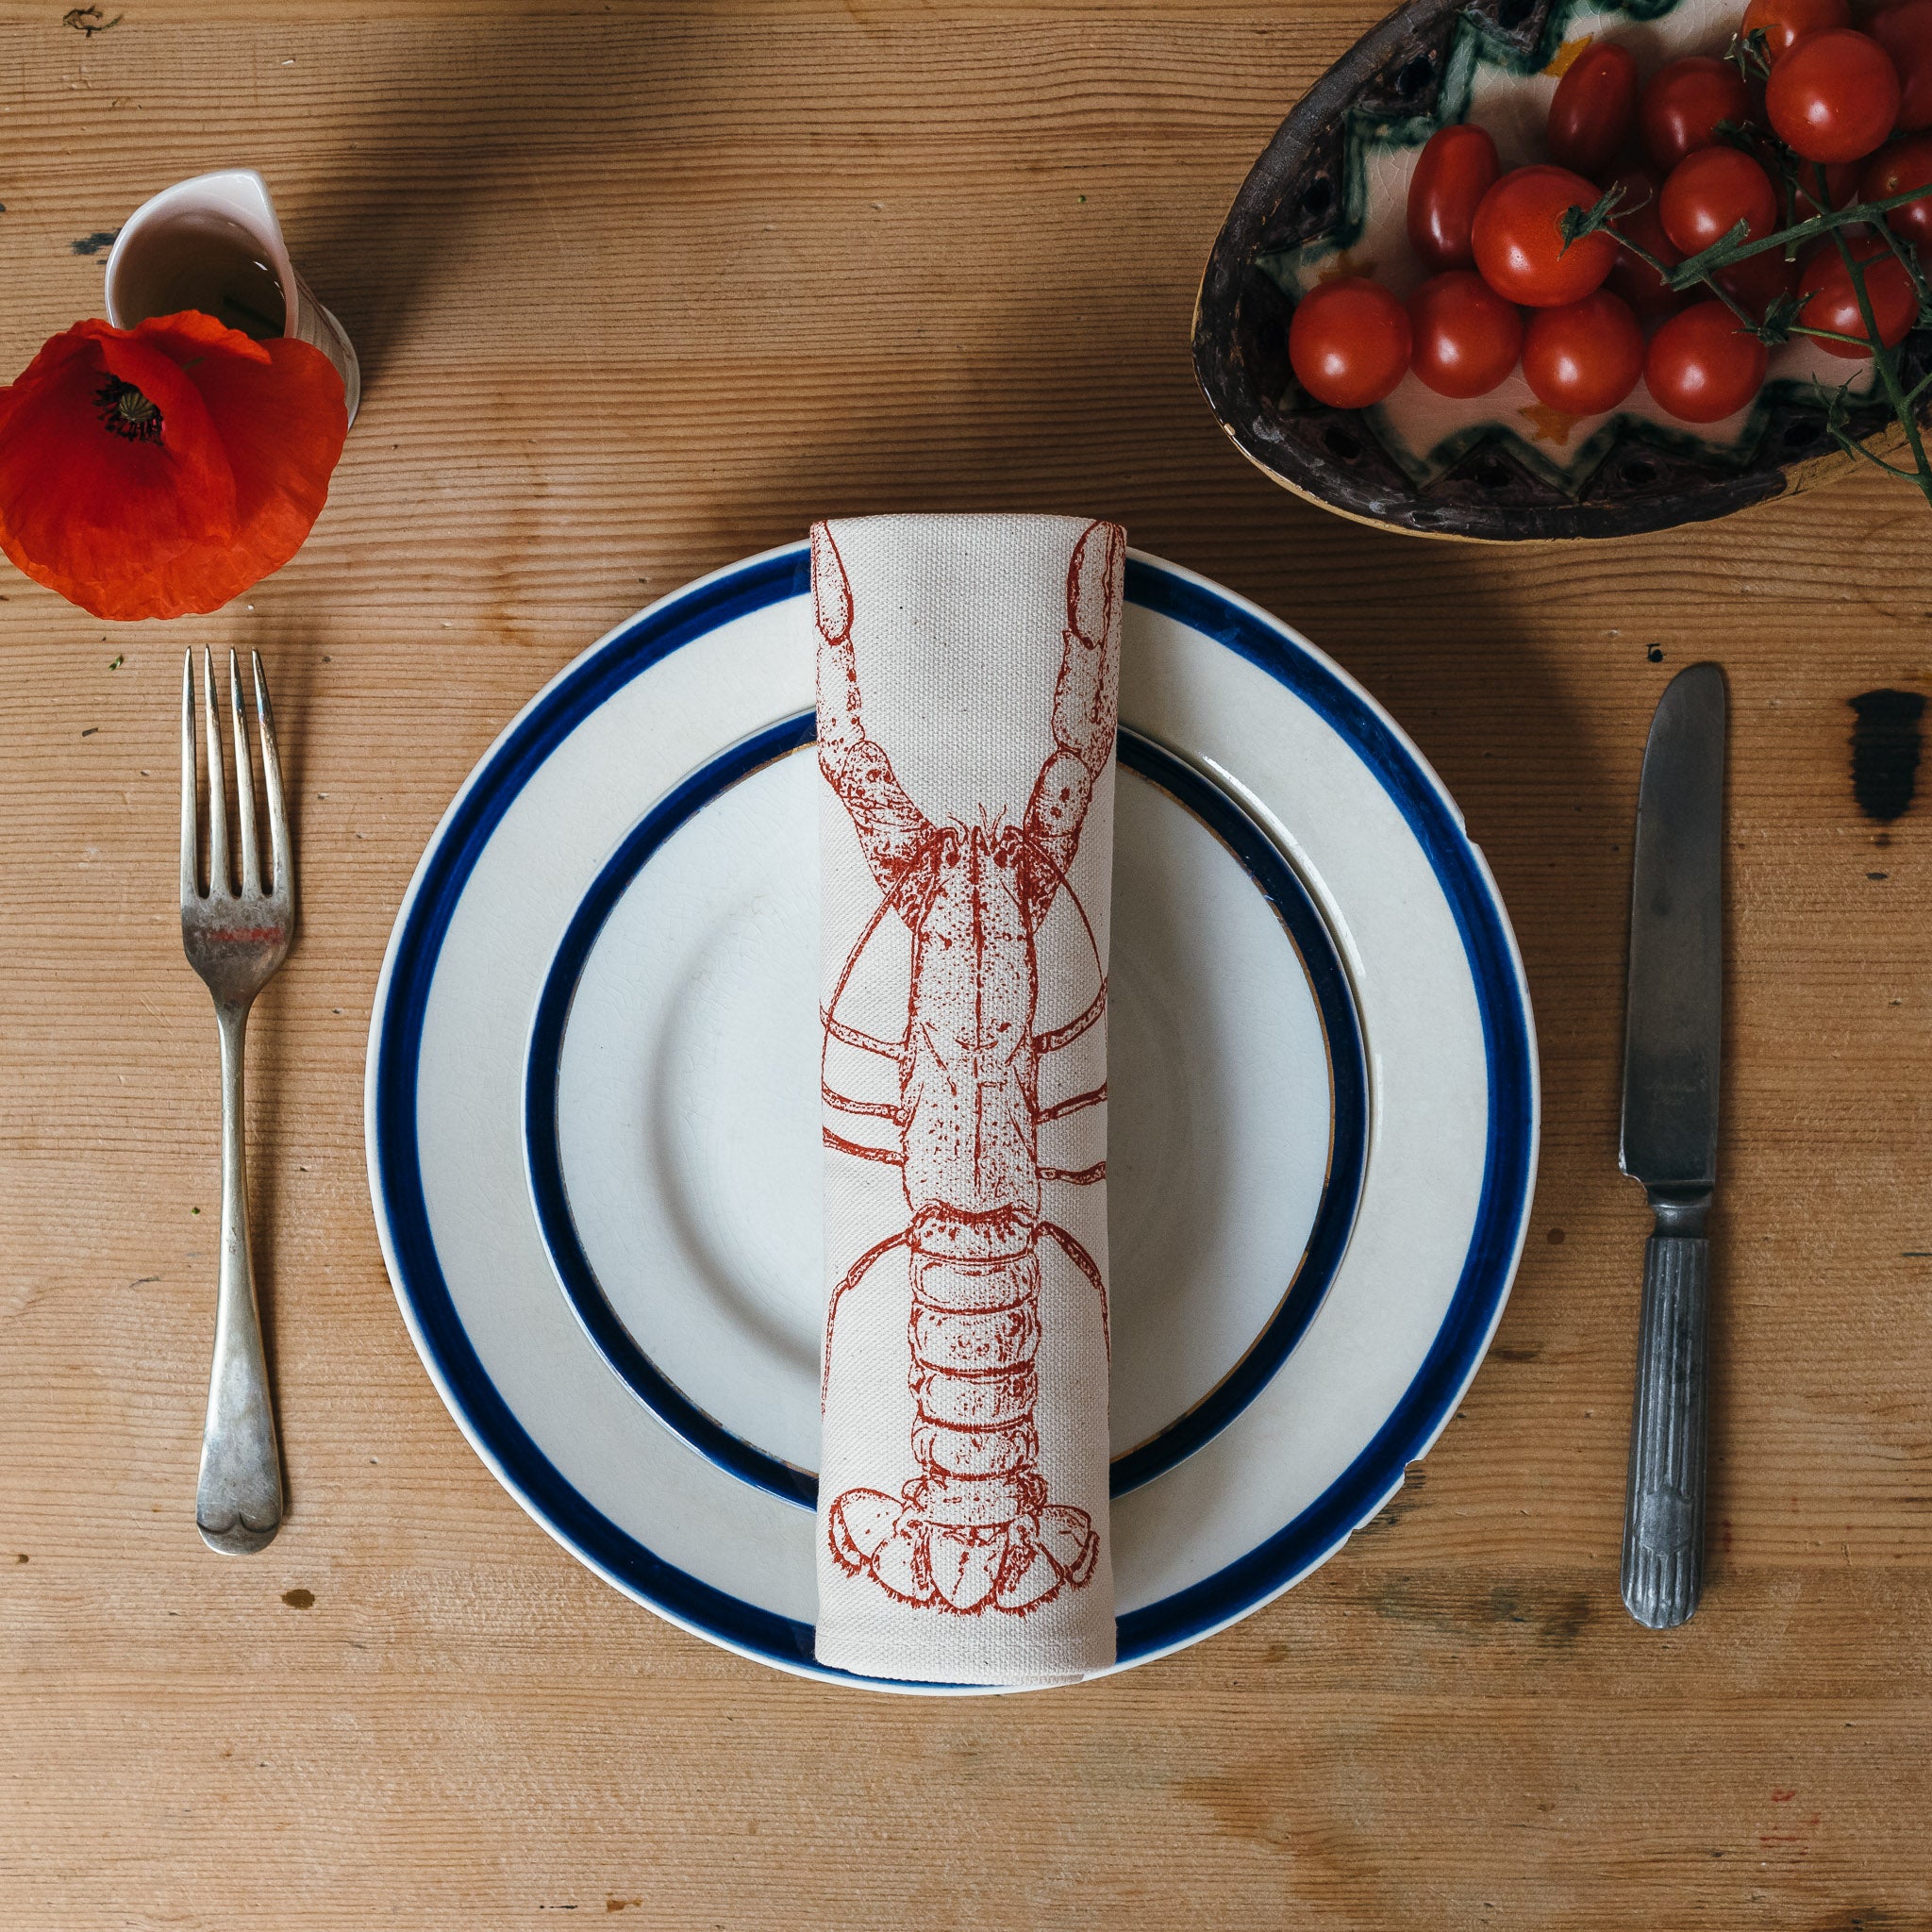 printed red lobster napkin table place setting